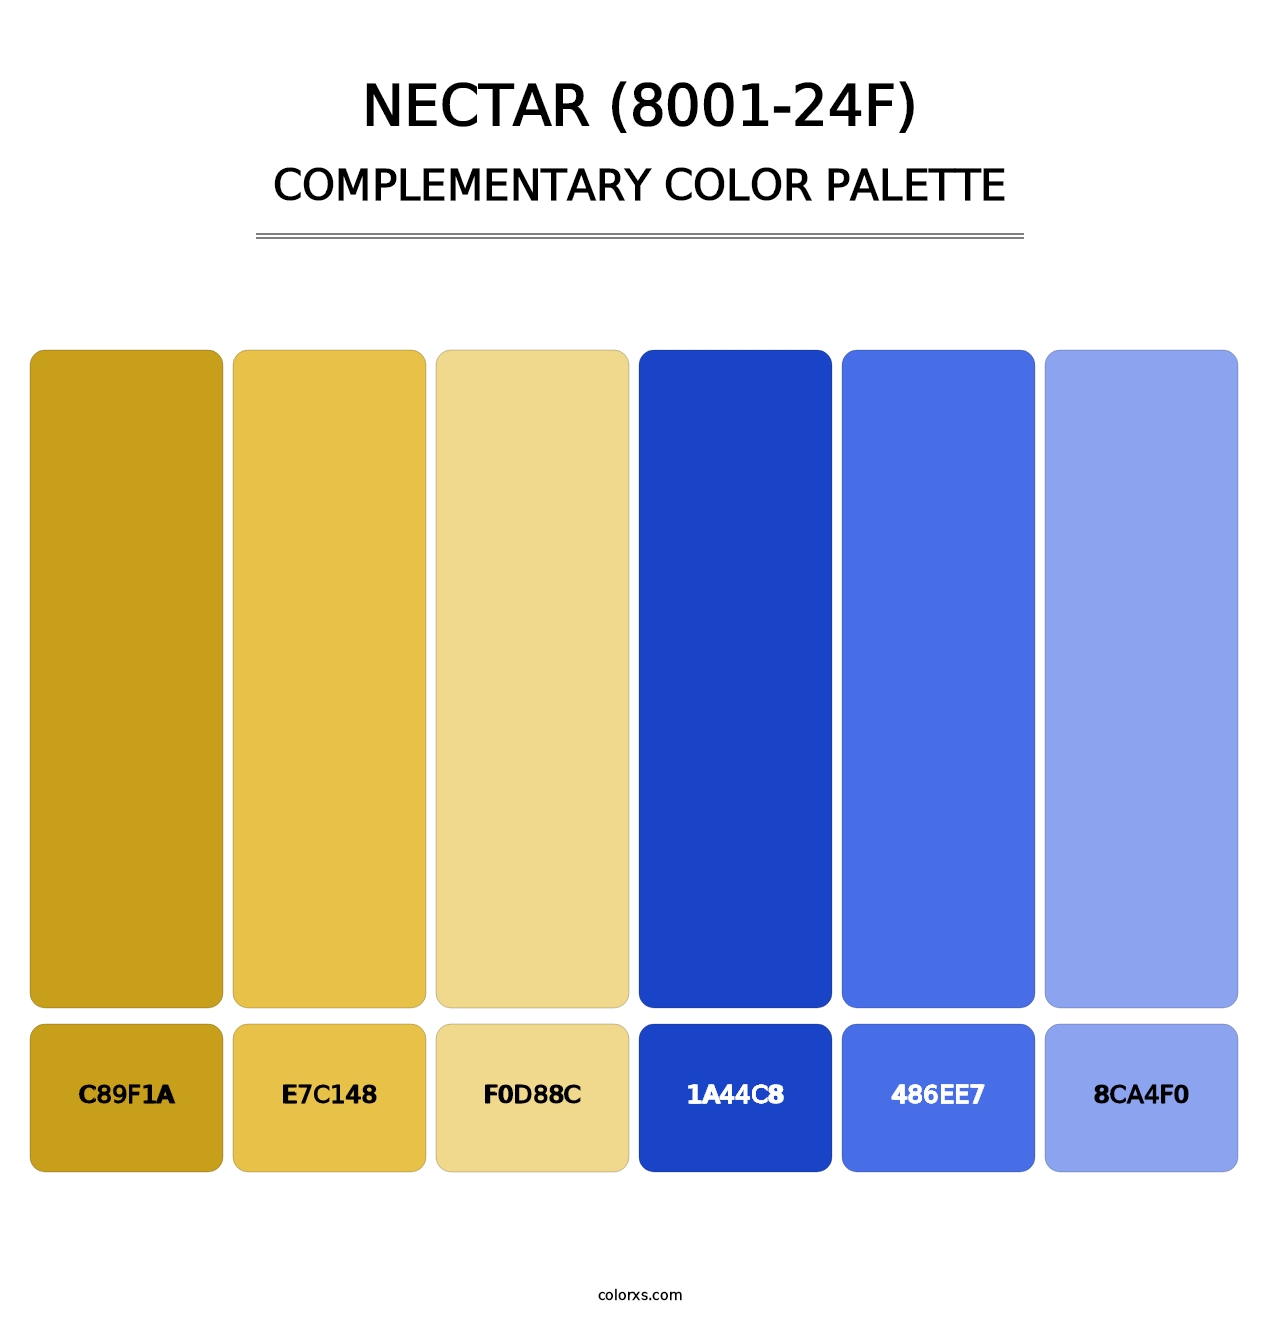 Nectar (8001-24F) - Complementary Color Palette